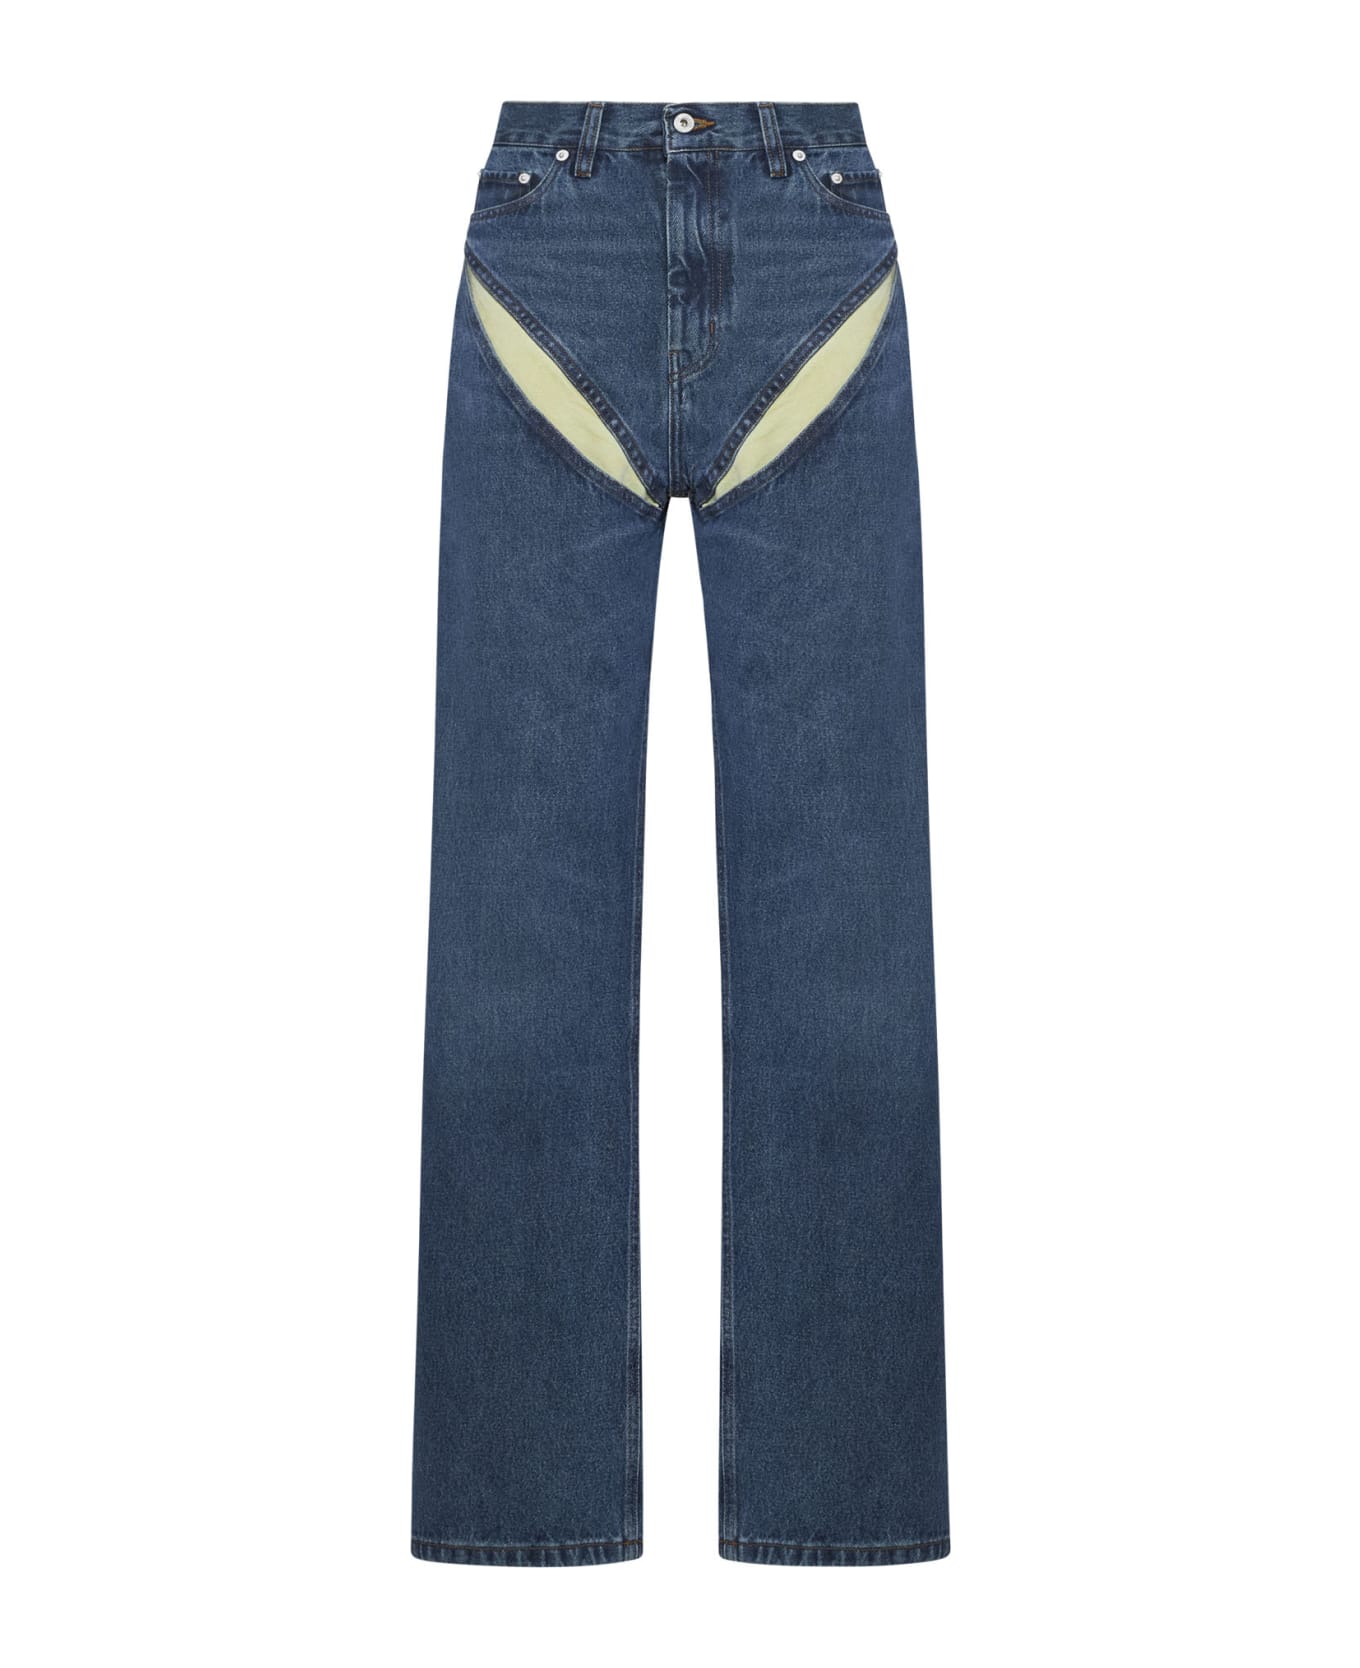 Y/Project Jeans - Evergreen vintage blue